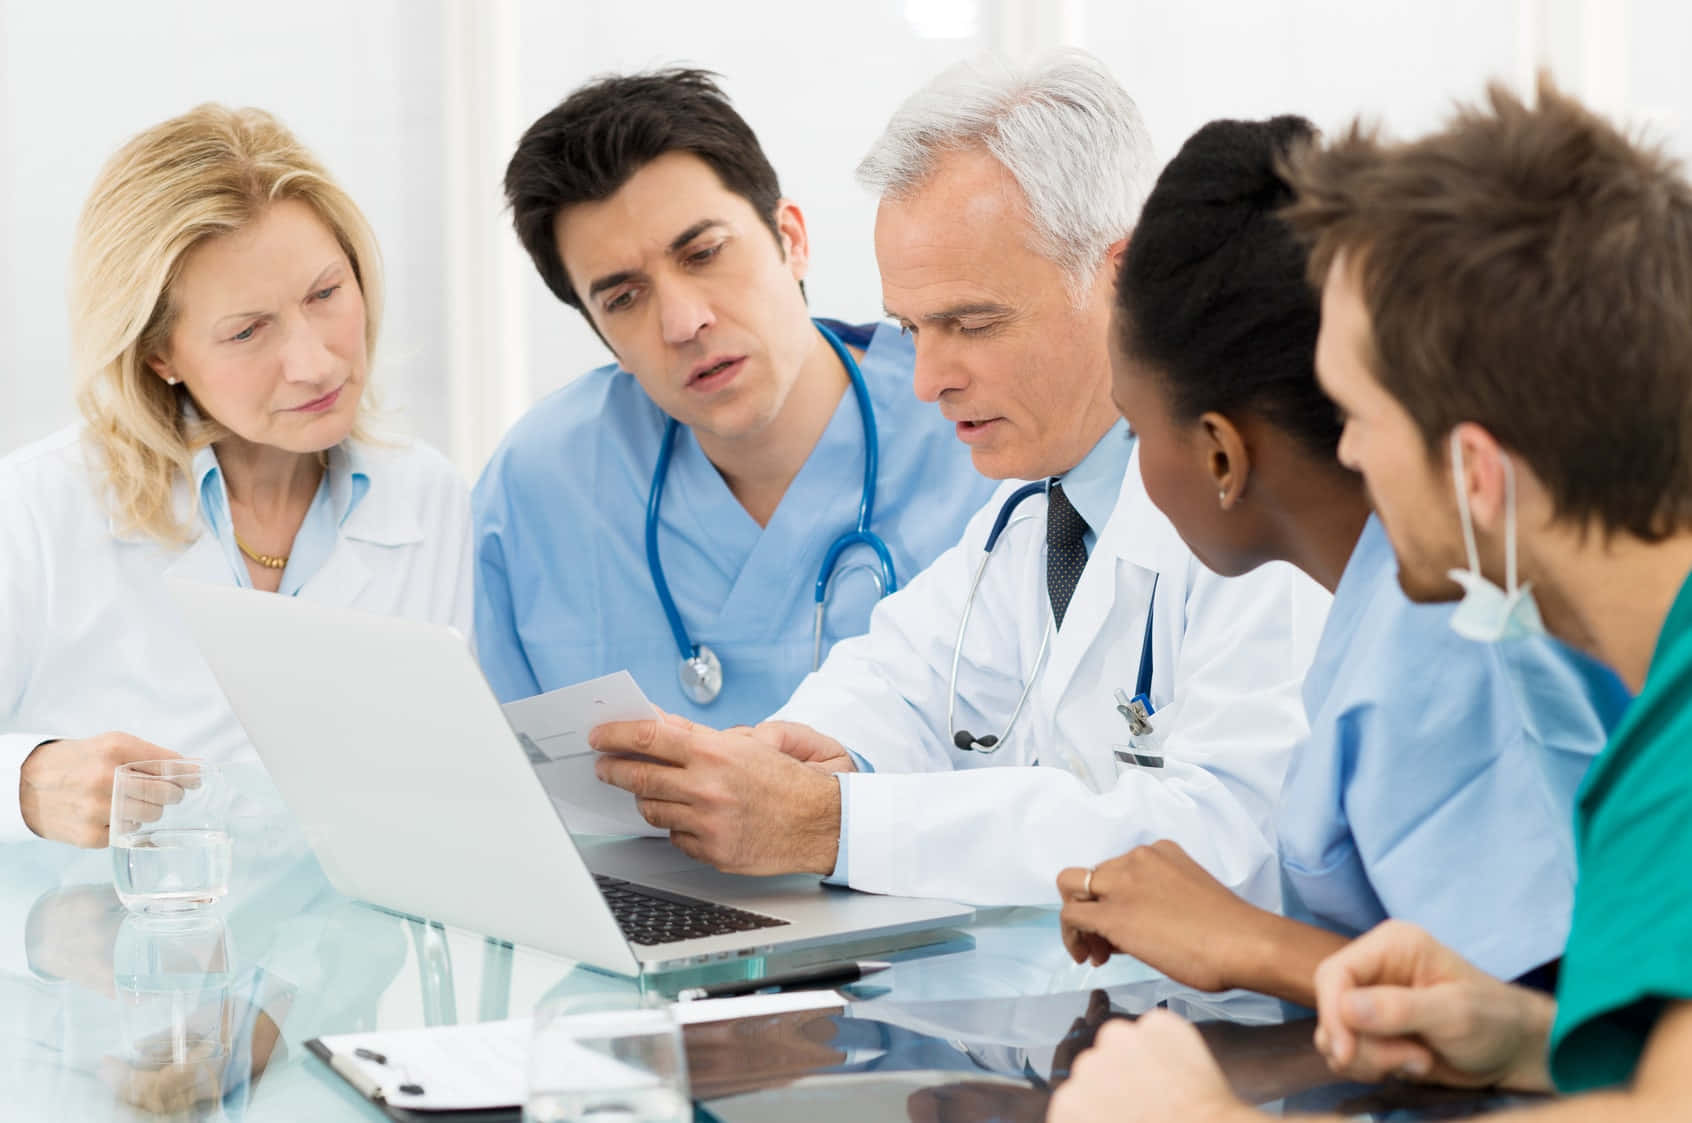 A Group Of Doctors Looking At A Laptop